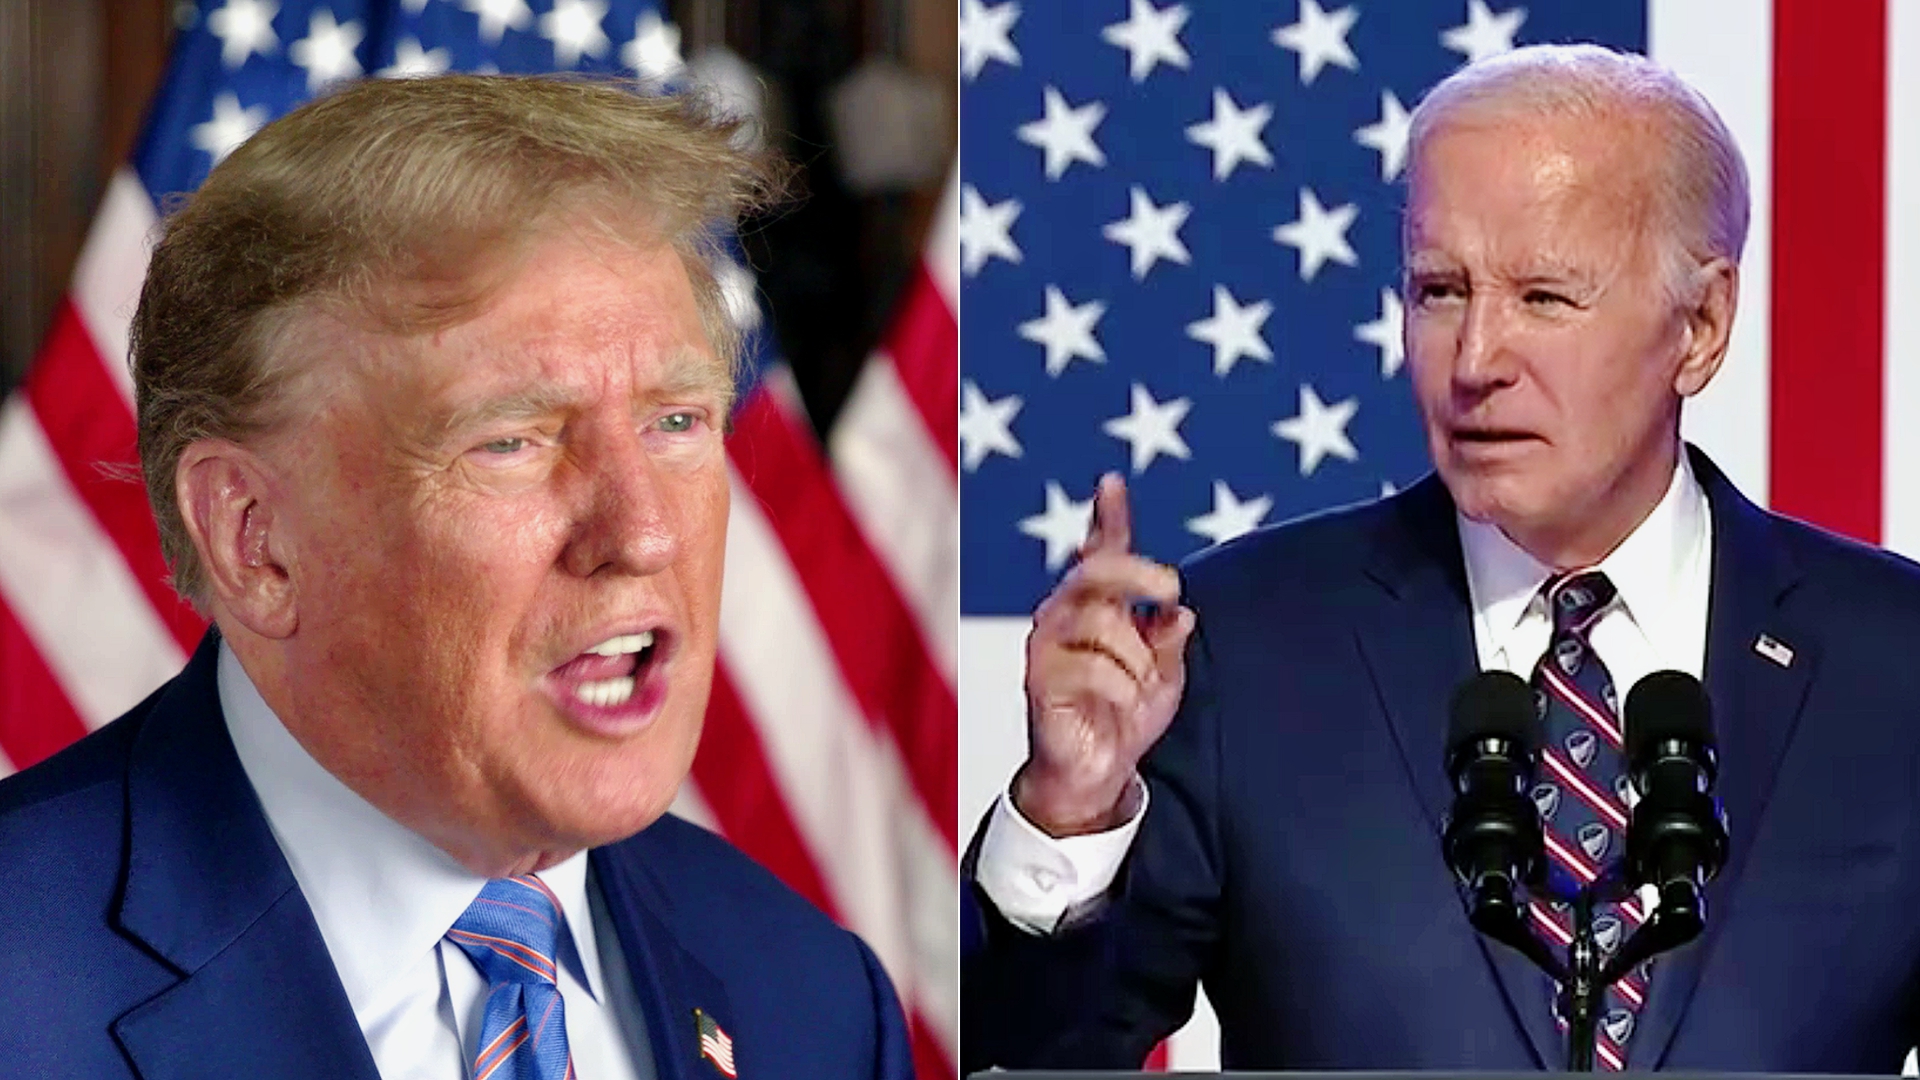 Biden Campaign Shuts Down Possibility of Third Debate With Trump: ‘The Debate About Debates Is Over!’